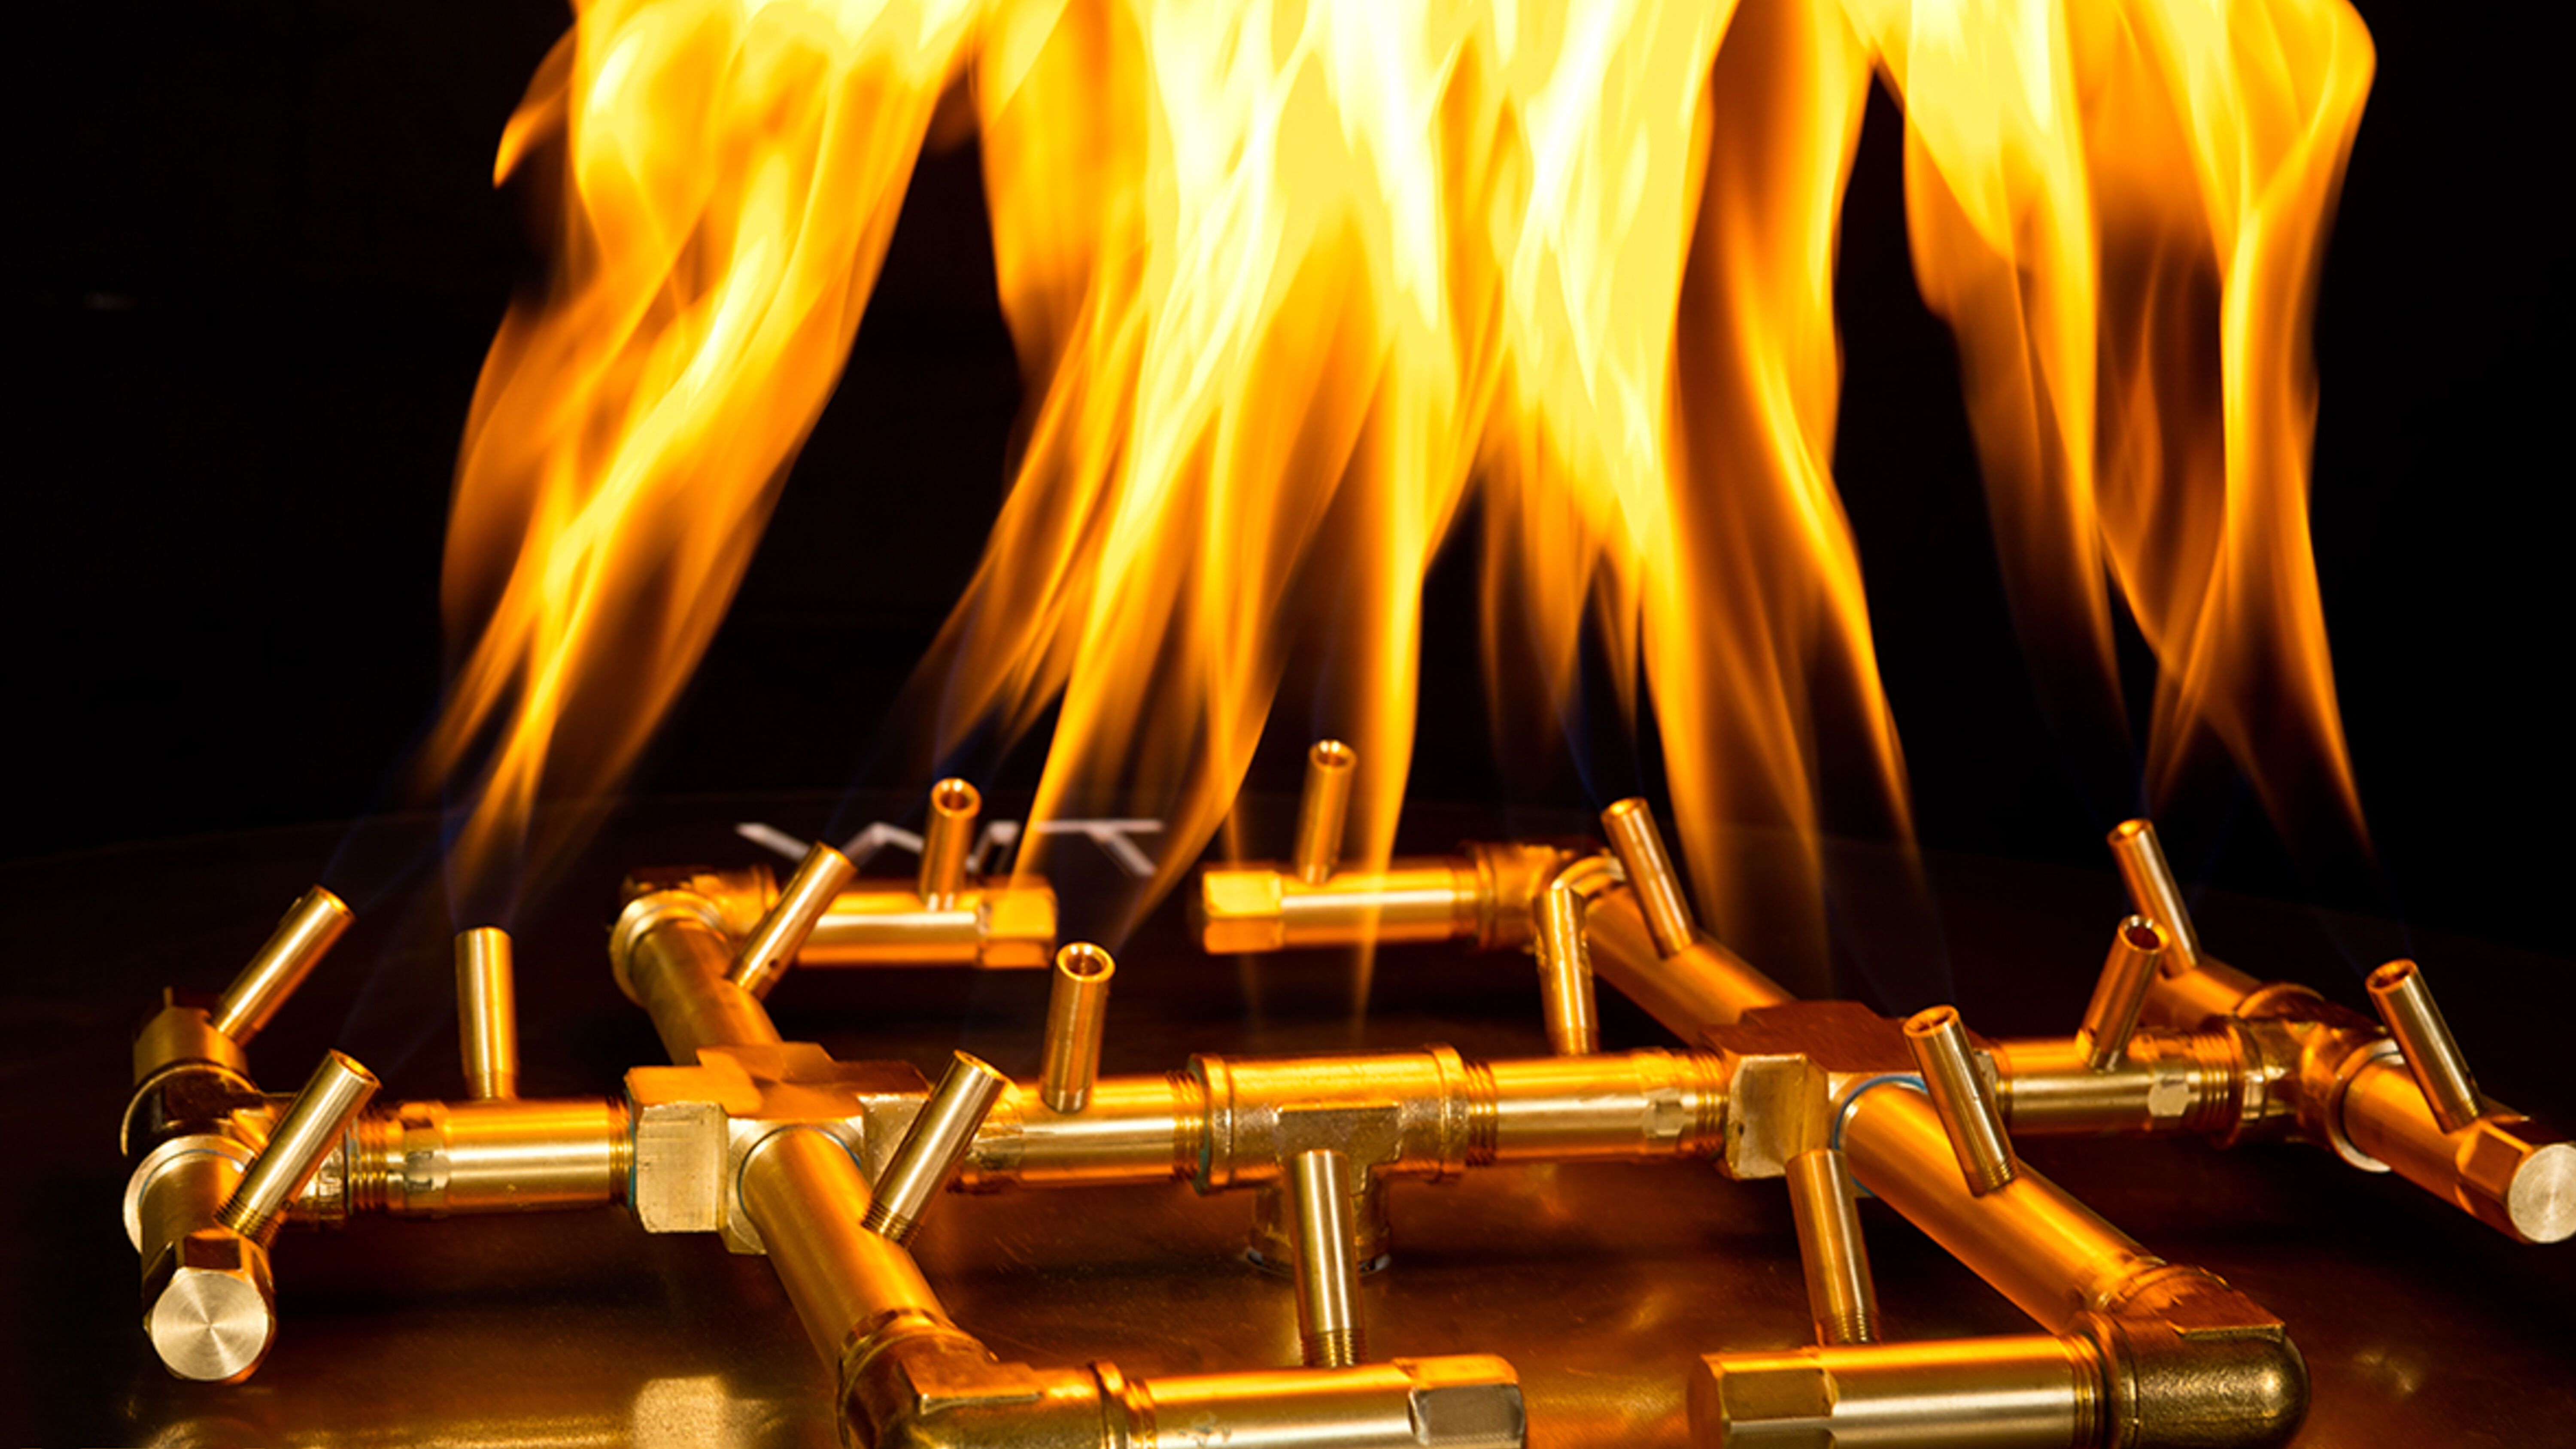 A close-up view of a brass CrossFire gas fire pit burner and supercharged orange flames.